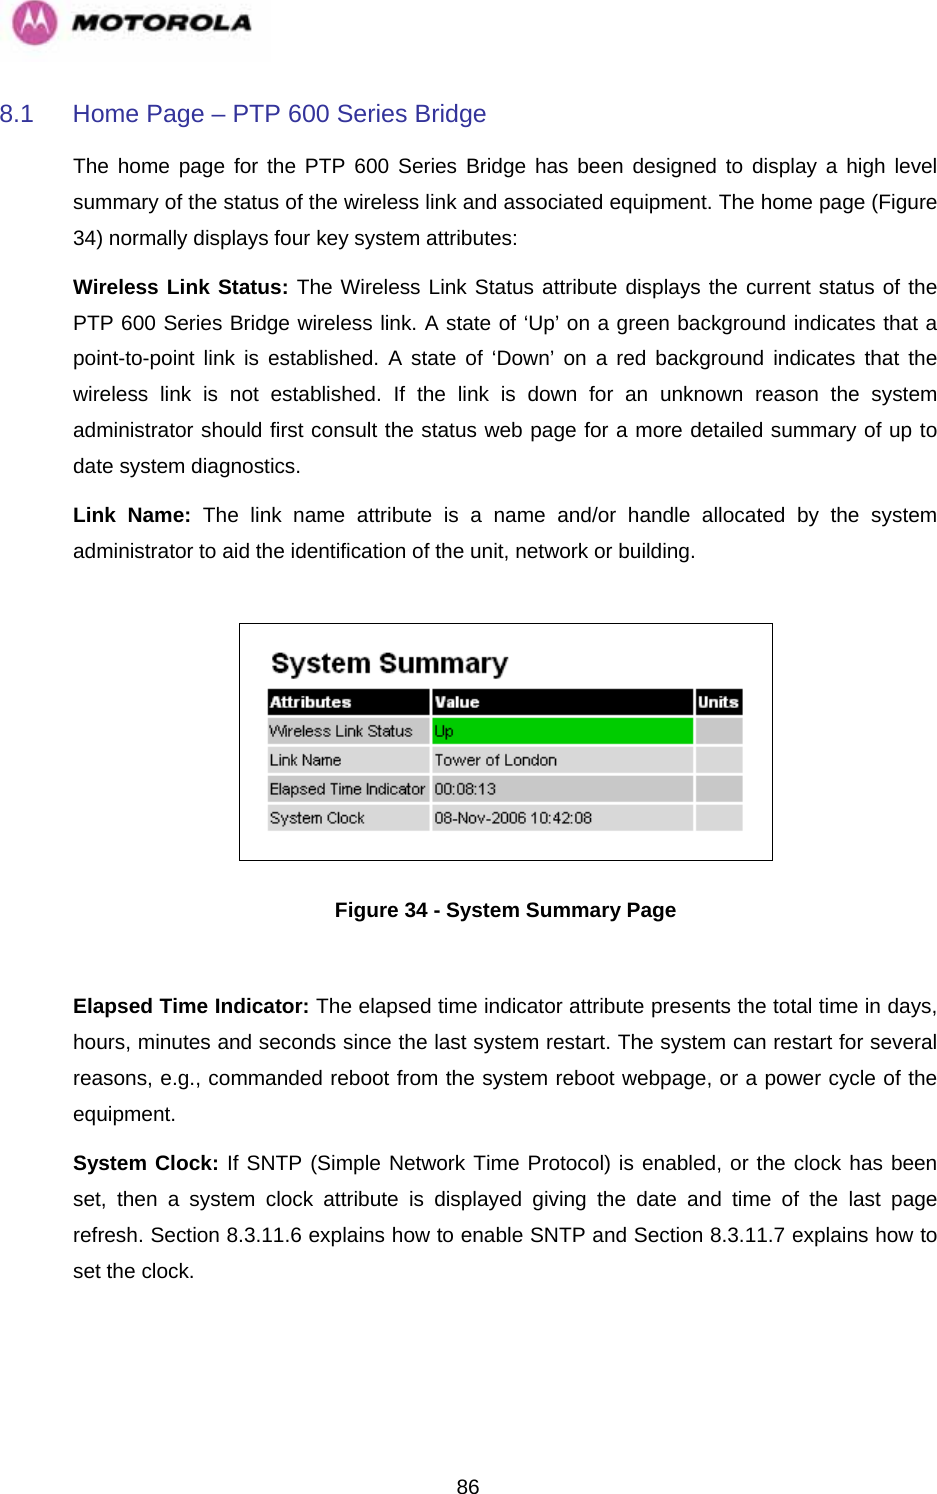   868.1  Home Page – PTP 600 Series Bridge The home page for the PTP 600 Series Bridge has been designed to display a high level summary of the status of the wireless link and associated equipment. The home page (Figure 34) normally displays four key system attributes: Wireless Link Status: The Wireless Link Status attribute displays the current status of the PTP 600 Series Bridge wireless link. A state of ‘Up’ on a green background indicates that a point-to-point link is established. A state of ‘Down’ on a red background indicates that the wireless link is not established. If the link is down for an unknown reason the system administrator should first consult the status web page for a more detailed summary of up to date system diagnostics.  Link Name: The link name attribute is a name and/or handle allocated by the system administrator to aid the identification of the unit, network or building.    Figure 34 - System Summary Page  Elapsed Time Indicator: The elapsed time indicator attribute presents the total time in days, hours, minutes and seconds since the last system restart. The system can restart for several reasons, e.g., commanded reboot from the system reboot webpage, or a power cycle of the equipment.  System Clock: If SNTP (Simple Network Time Protocol) is enabled, or the clock has been set, then a system clock attribute is displayed giving the date and time of the last page refresh. Section 8.3.11.6 explains how to enable SNTP and Section 8.3.11.7 explains how to set the clock. 